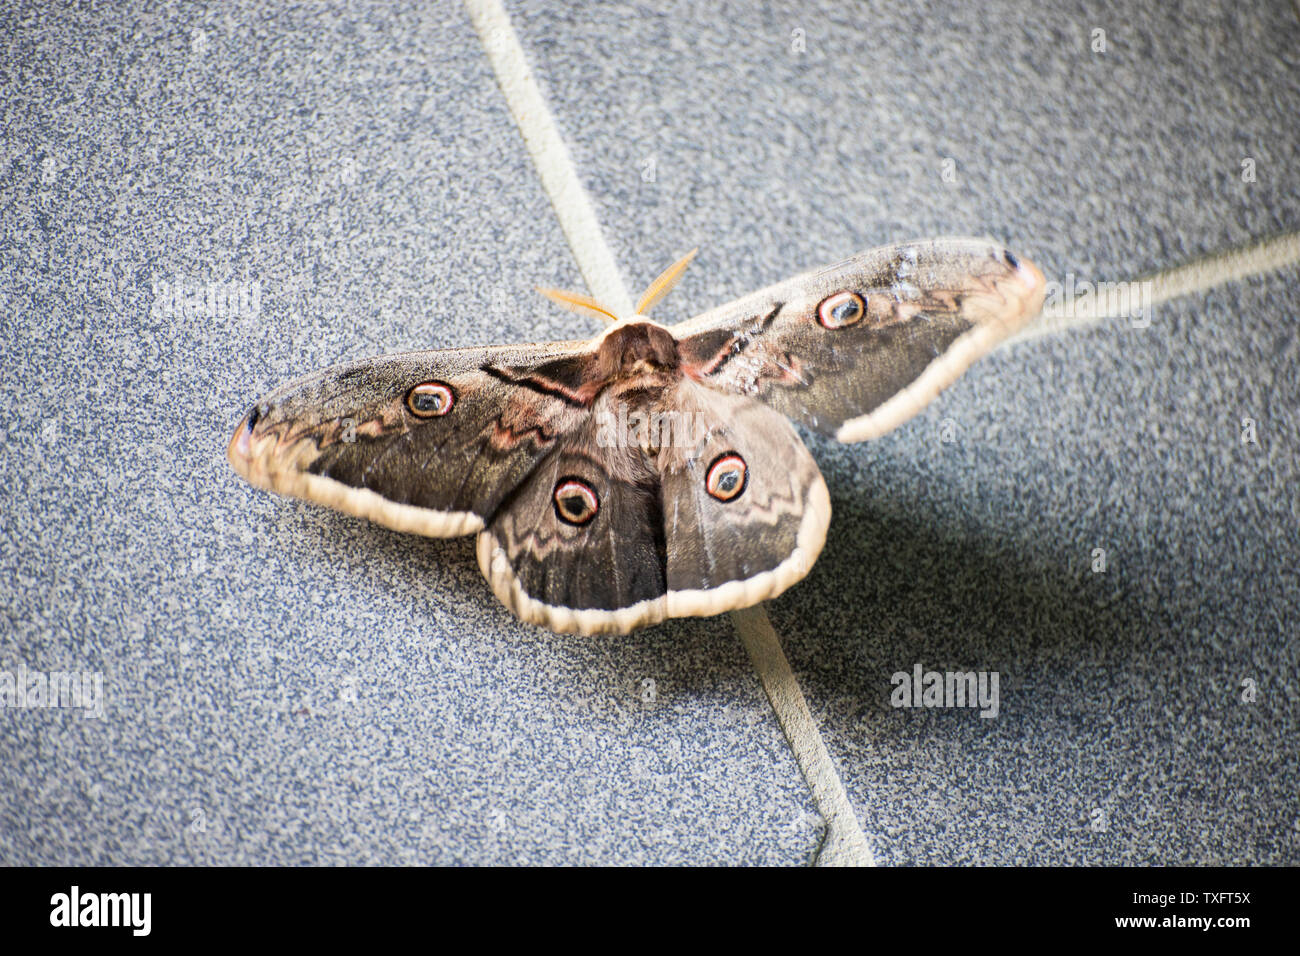 Saturnia pyri or peackock moth, the largest european moth, on grey artificial floor. Tuscany, Italy. Stock Photo